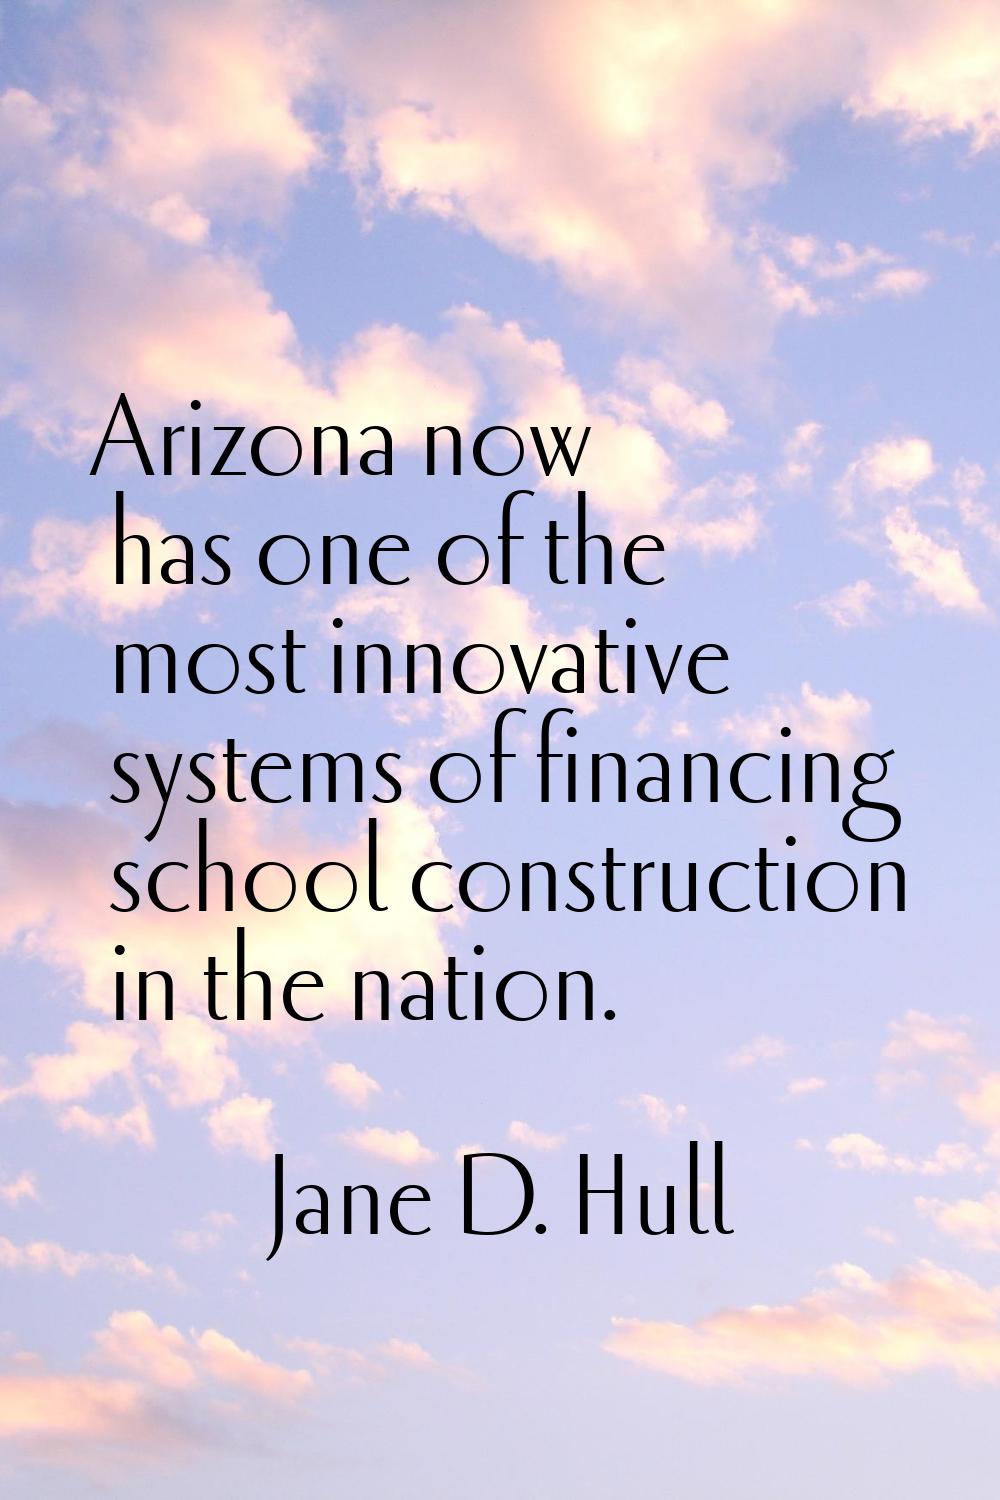 Arizona now has one of the most innovative systems of financing school construction in the nation.